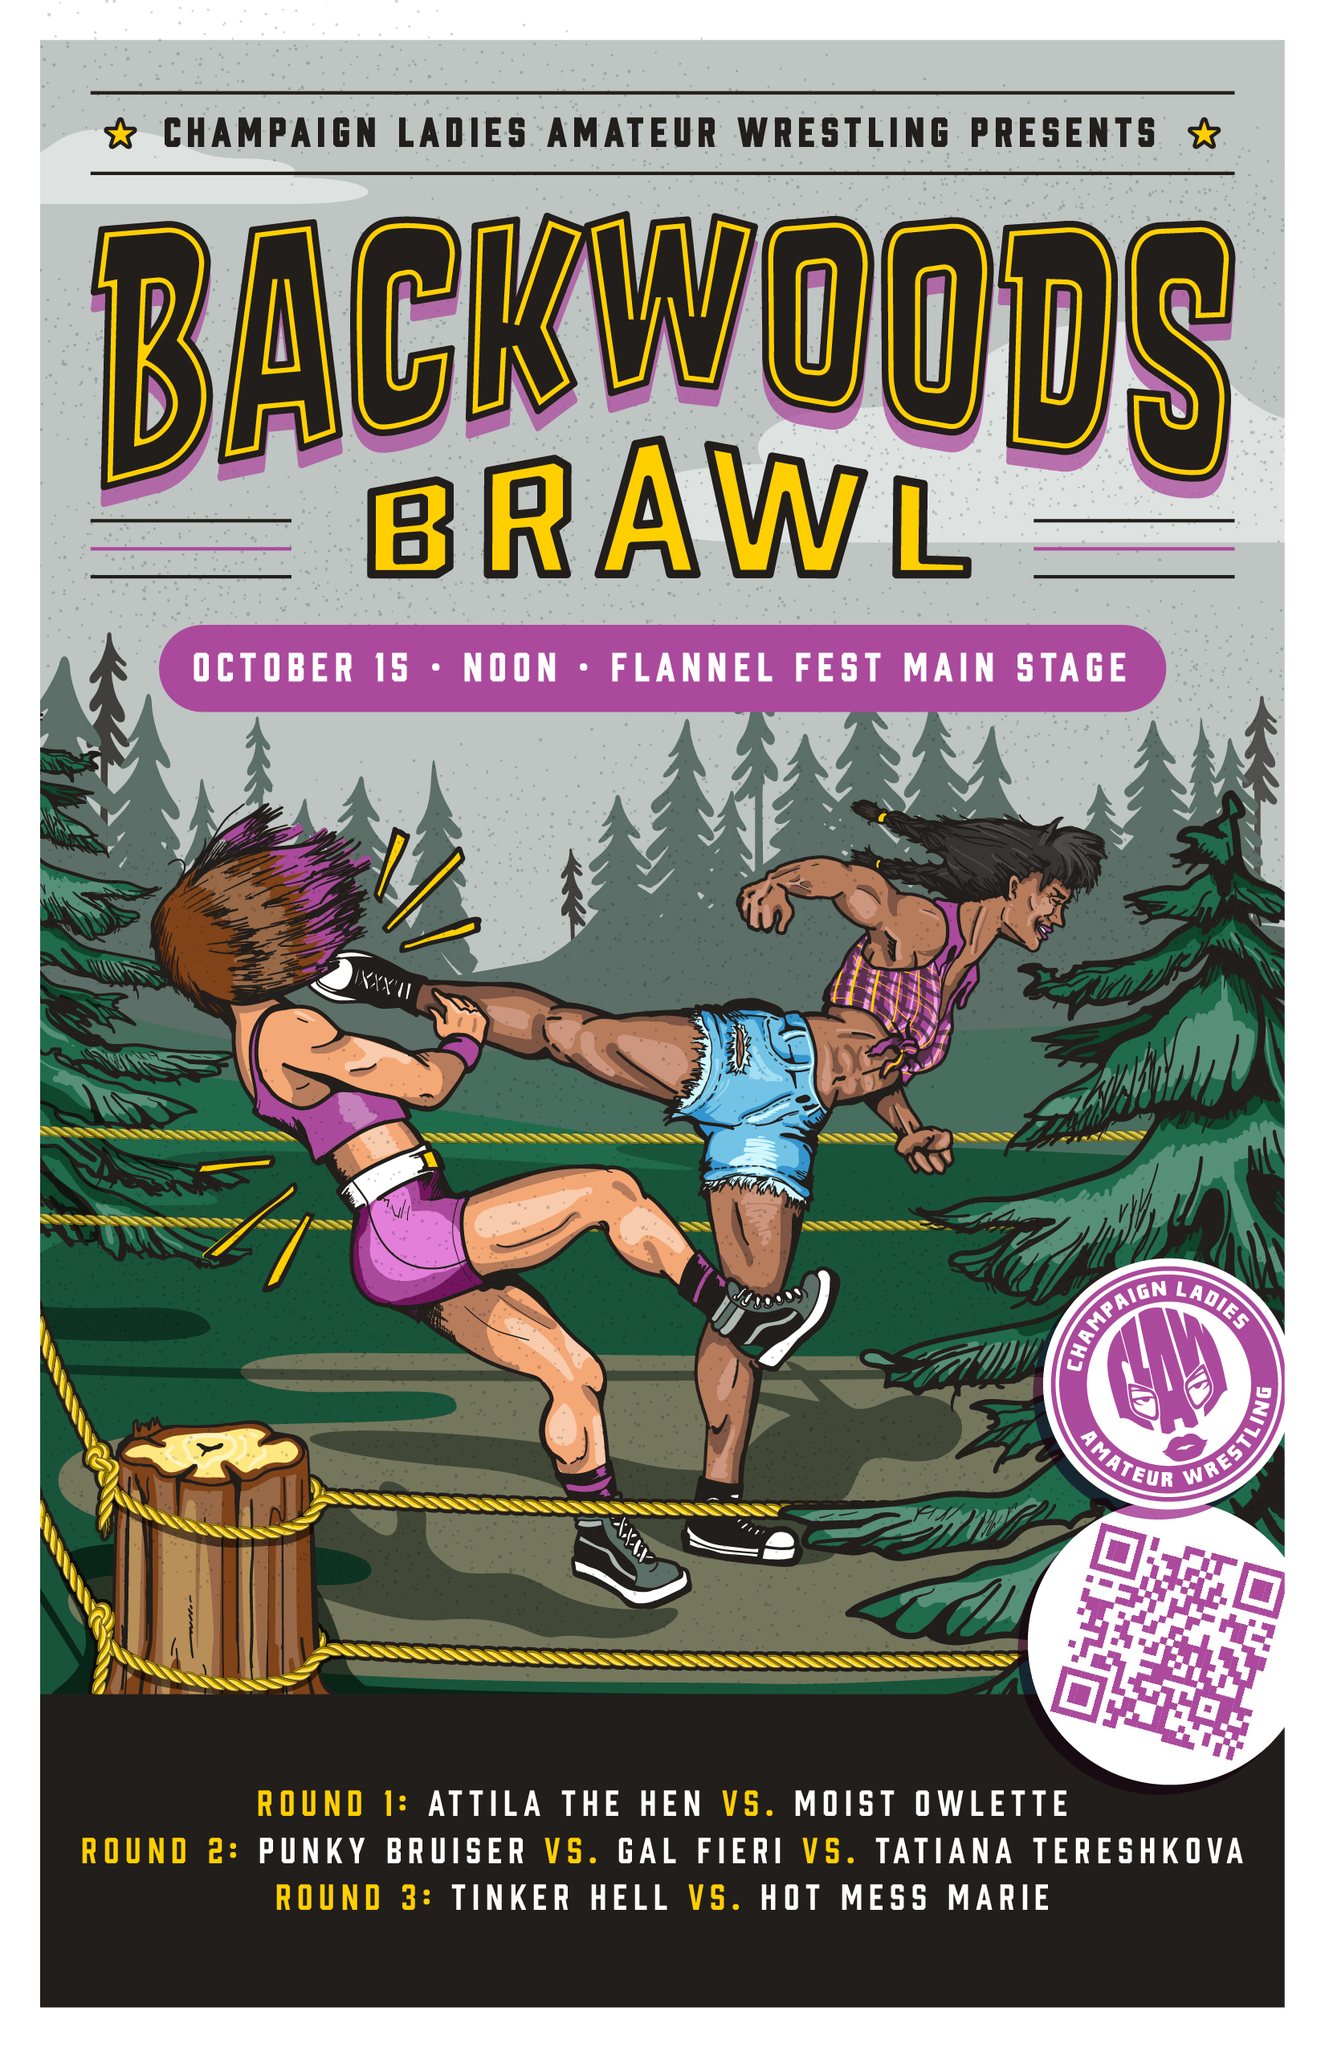 Illustrated poster for CLAW's Backwoods Brawl. On the right, a brown-skinned woman is giving a roundhouse kick to a white-skinned woman. They are in a forest-like setting. There is text with the lineup of matches below the illustration. Image from the CLAW Facebook page. 